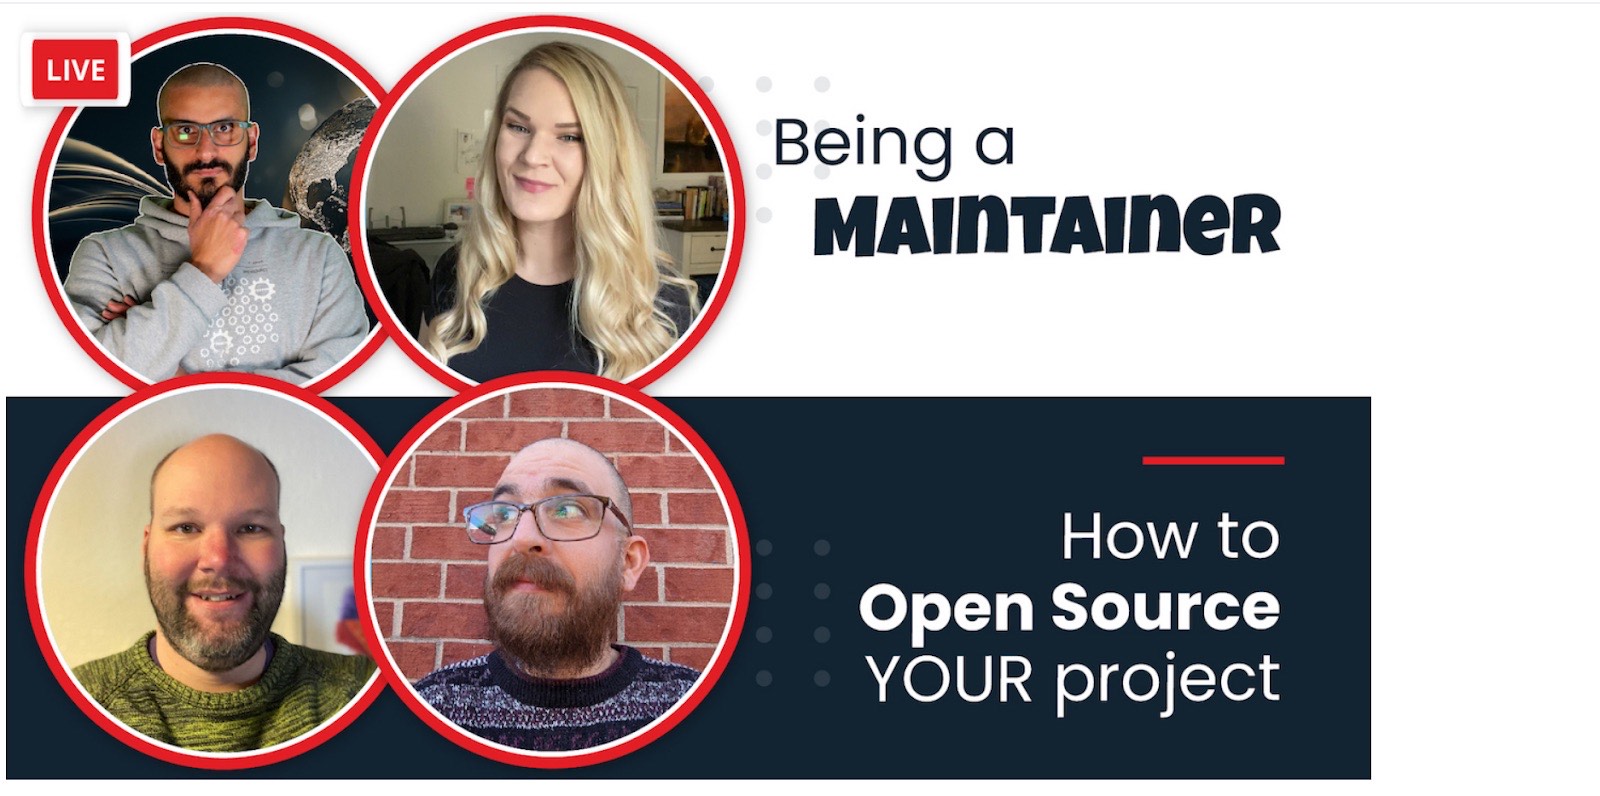 Cover photo of Youtube video for how to open source your project